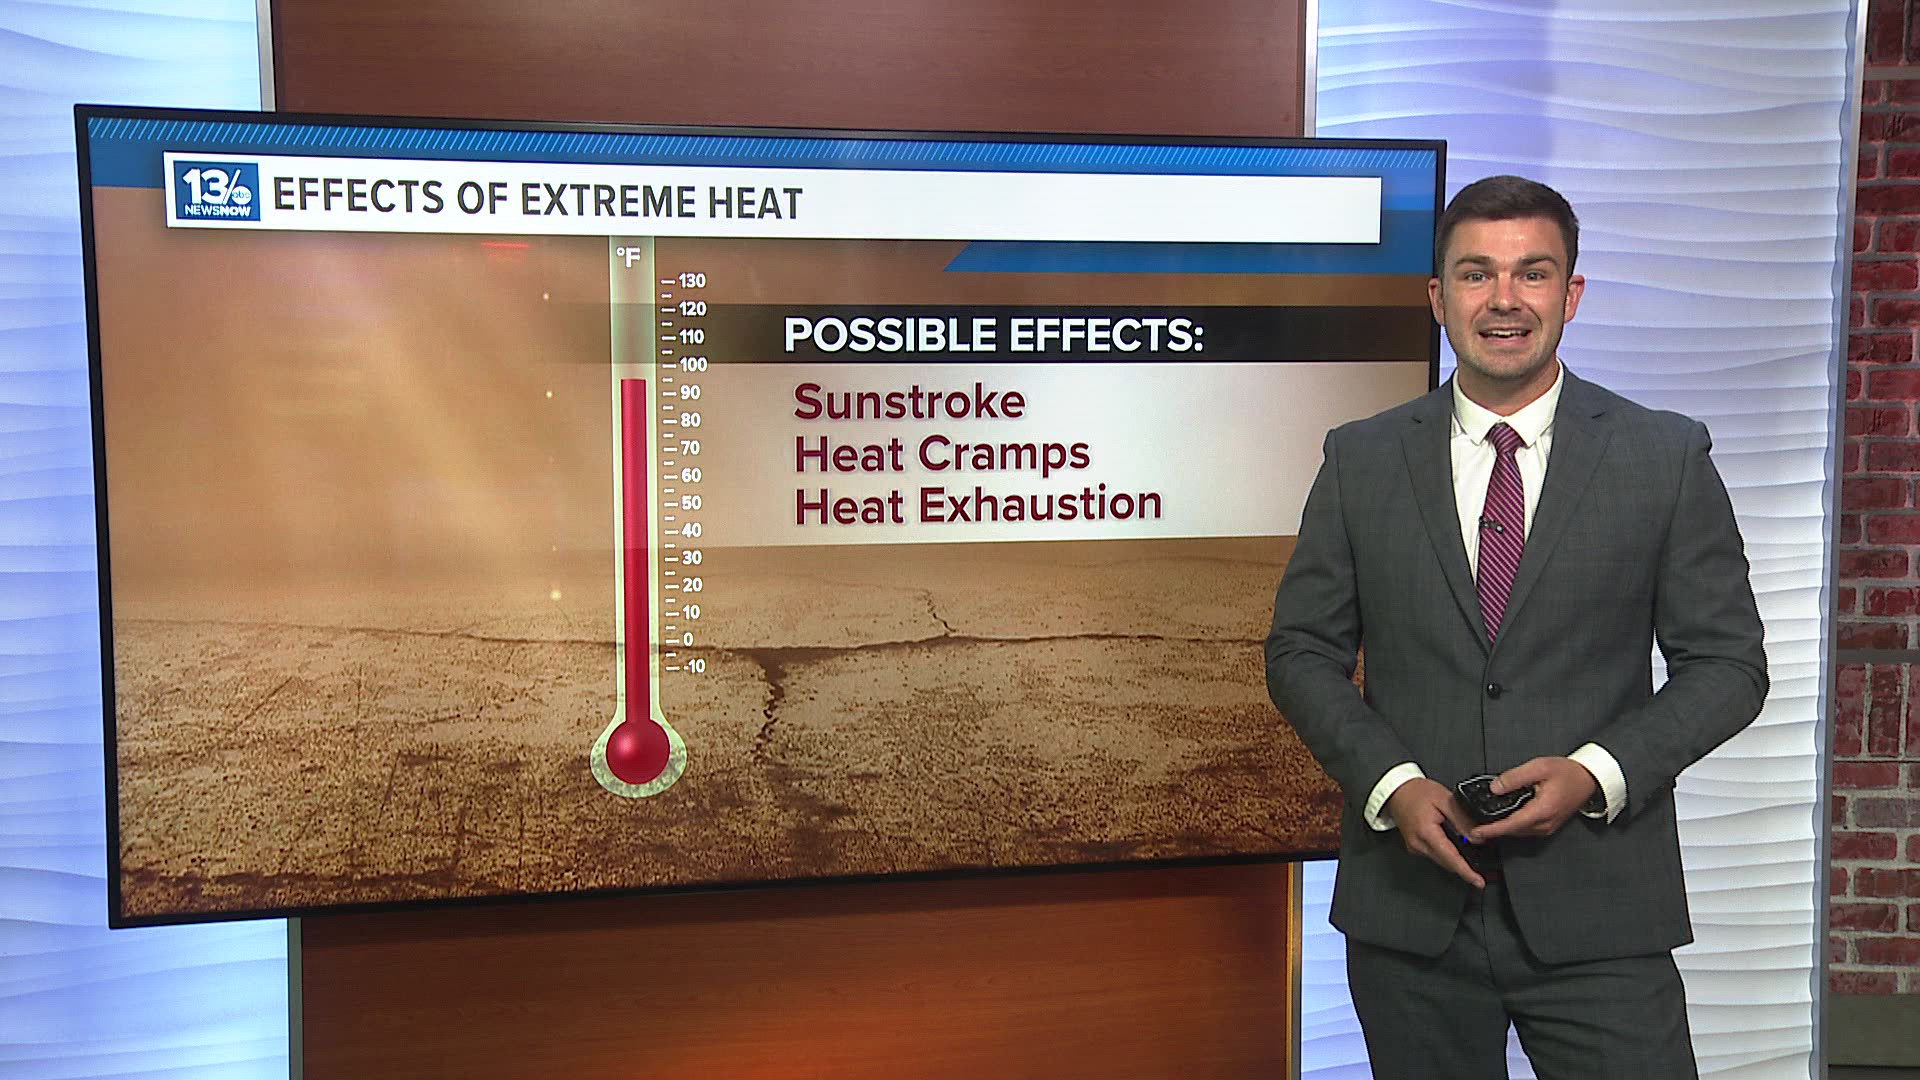 The heat index is a measurement that considers both air temperature and humidity to determine how hot it actually feels to the human body.